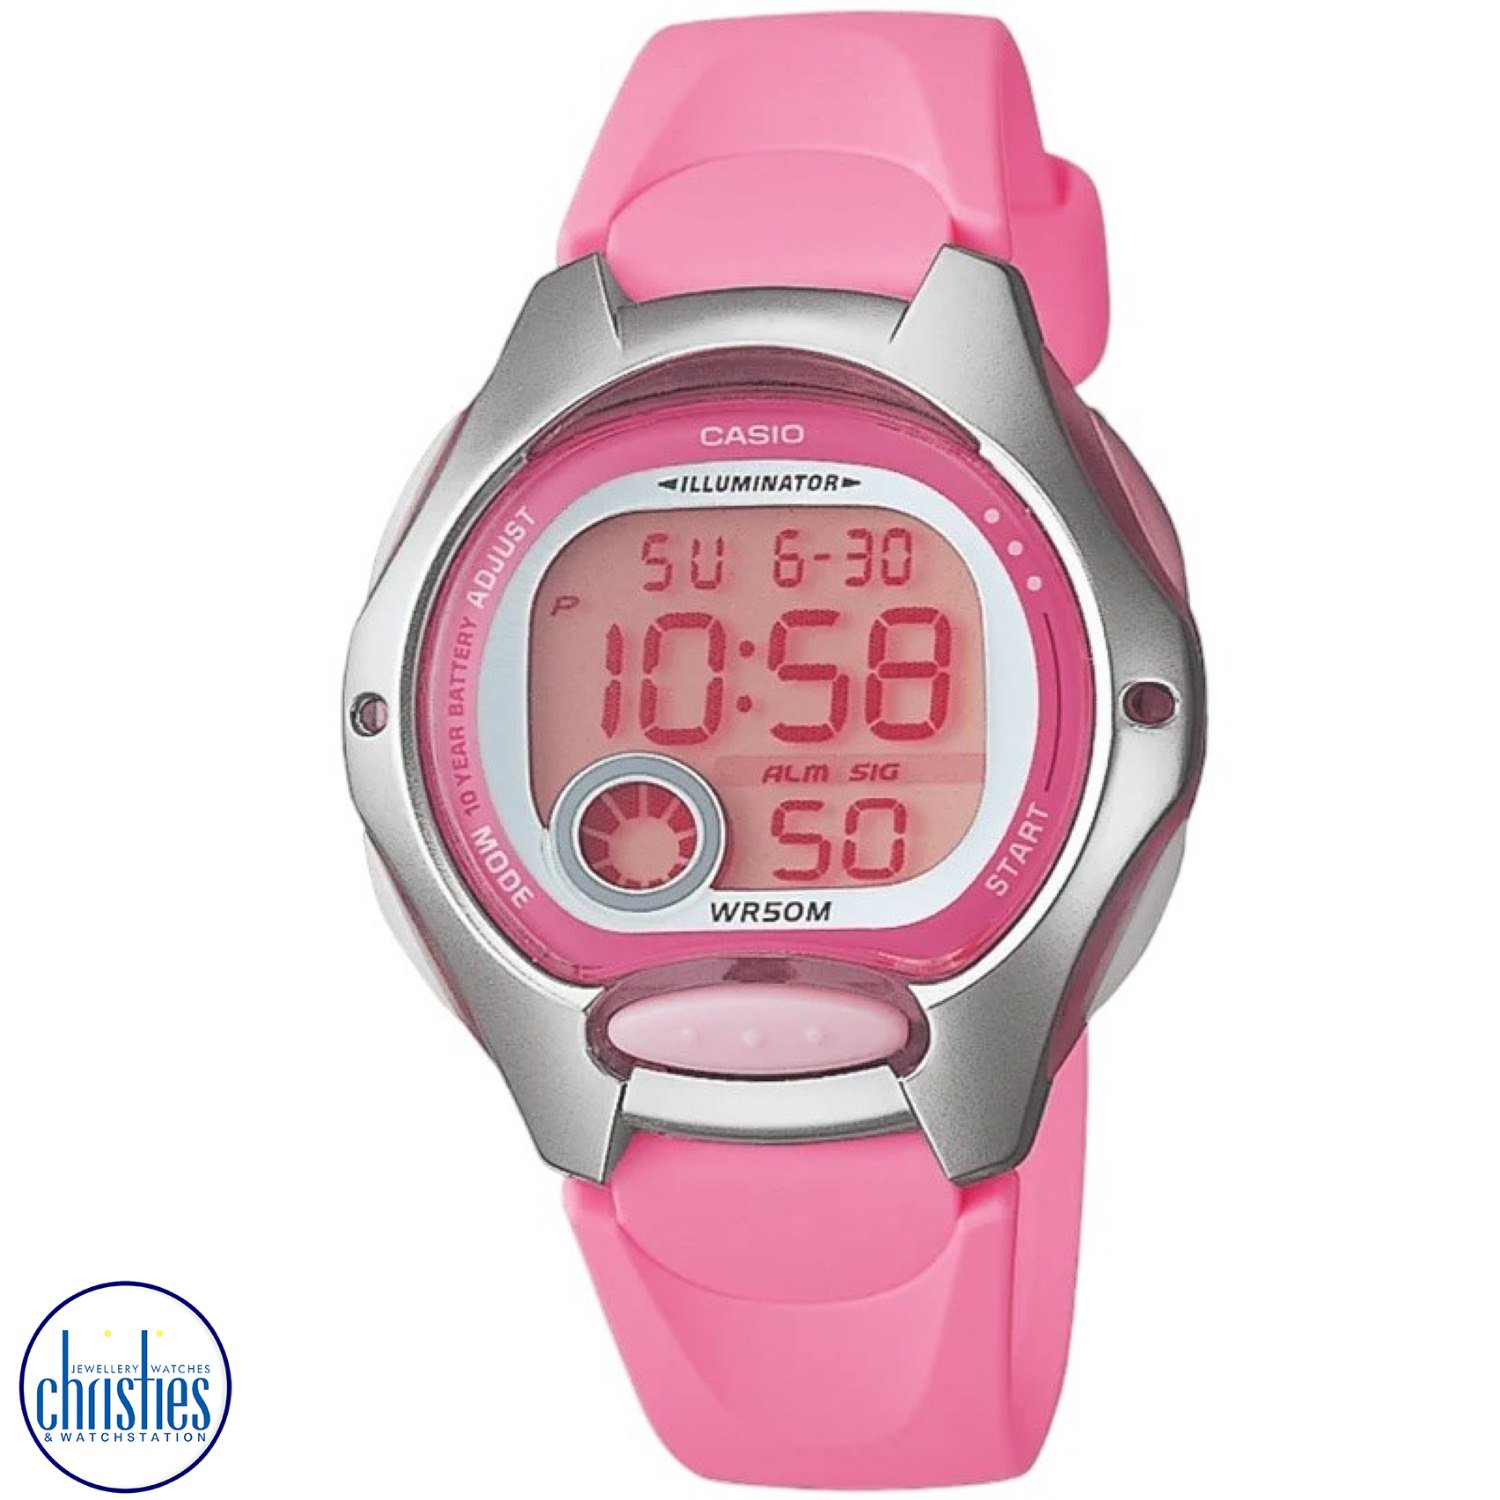 LW200-4B Casio Dual Time Alarm Watch. Casio’s LW200 Illuminator digital watch for women or children is a sleek and sporty timepiece featuring a pink plastic resin band, a metallic resin case and a large digital time display with stopwatch and day and date